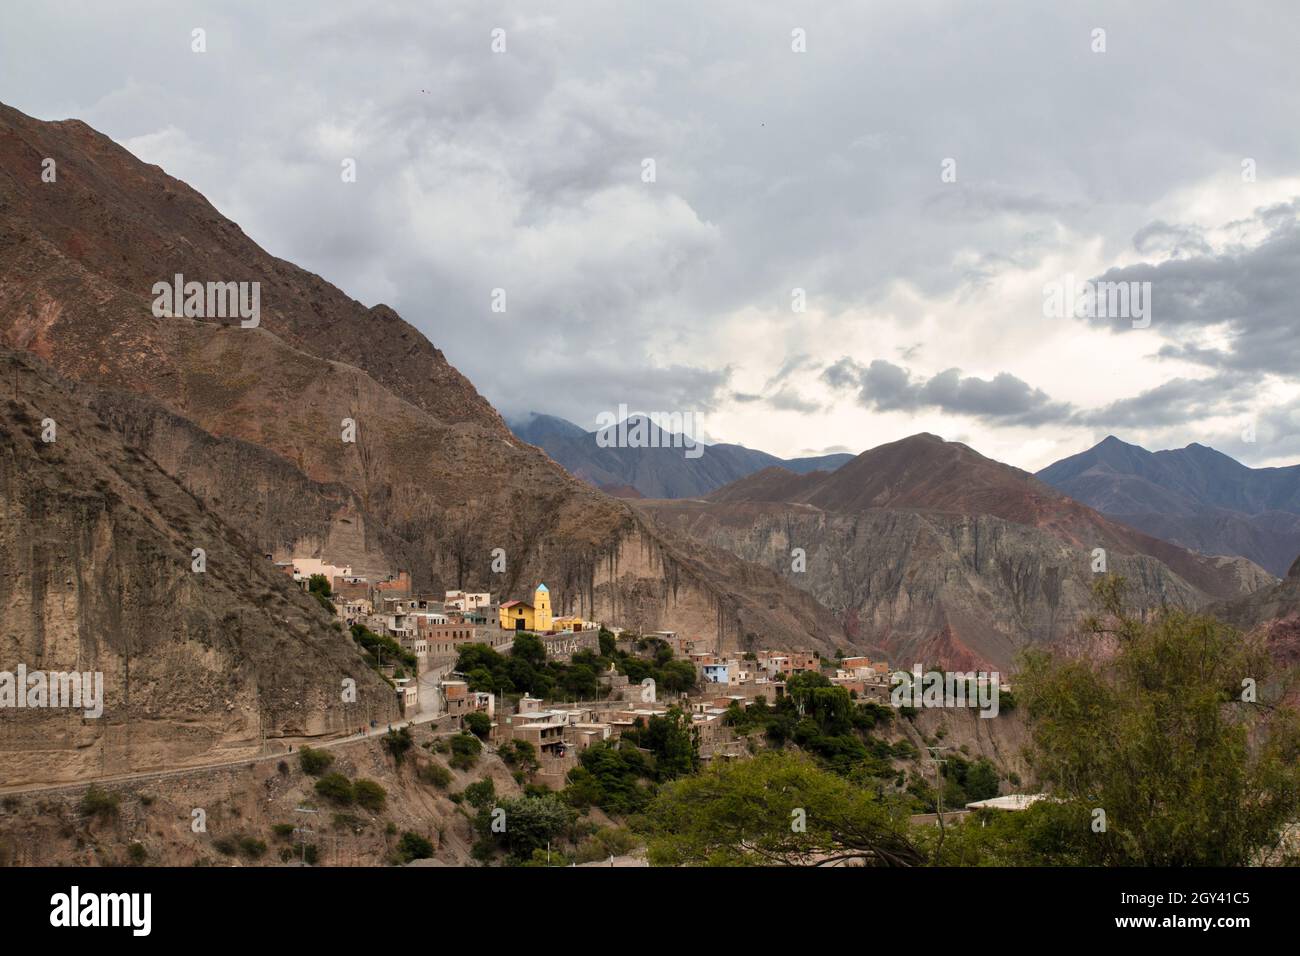 Iruya, seen from afar from the town on the outskirts of Salta, in northern Argentina. Stock Photo